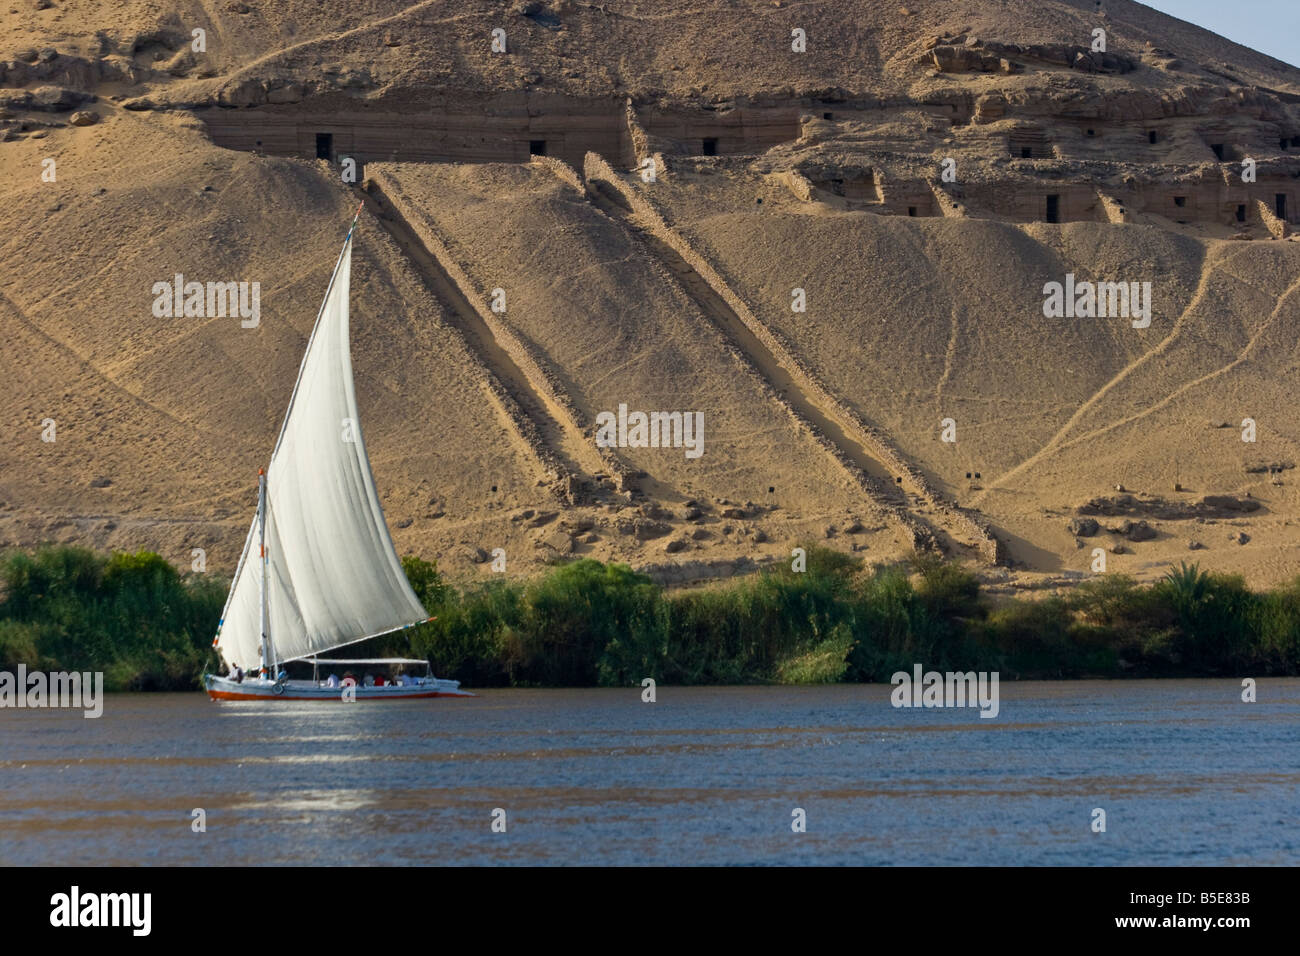 Tombs of the Nobles and Felucca Sailboat on the Nile River in Aswan Egypt Stock Photo